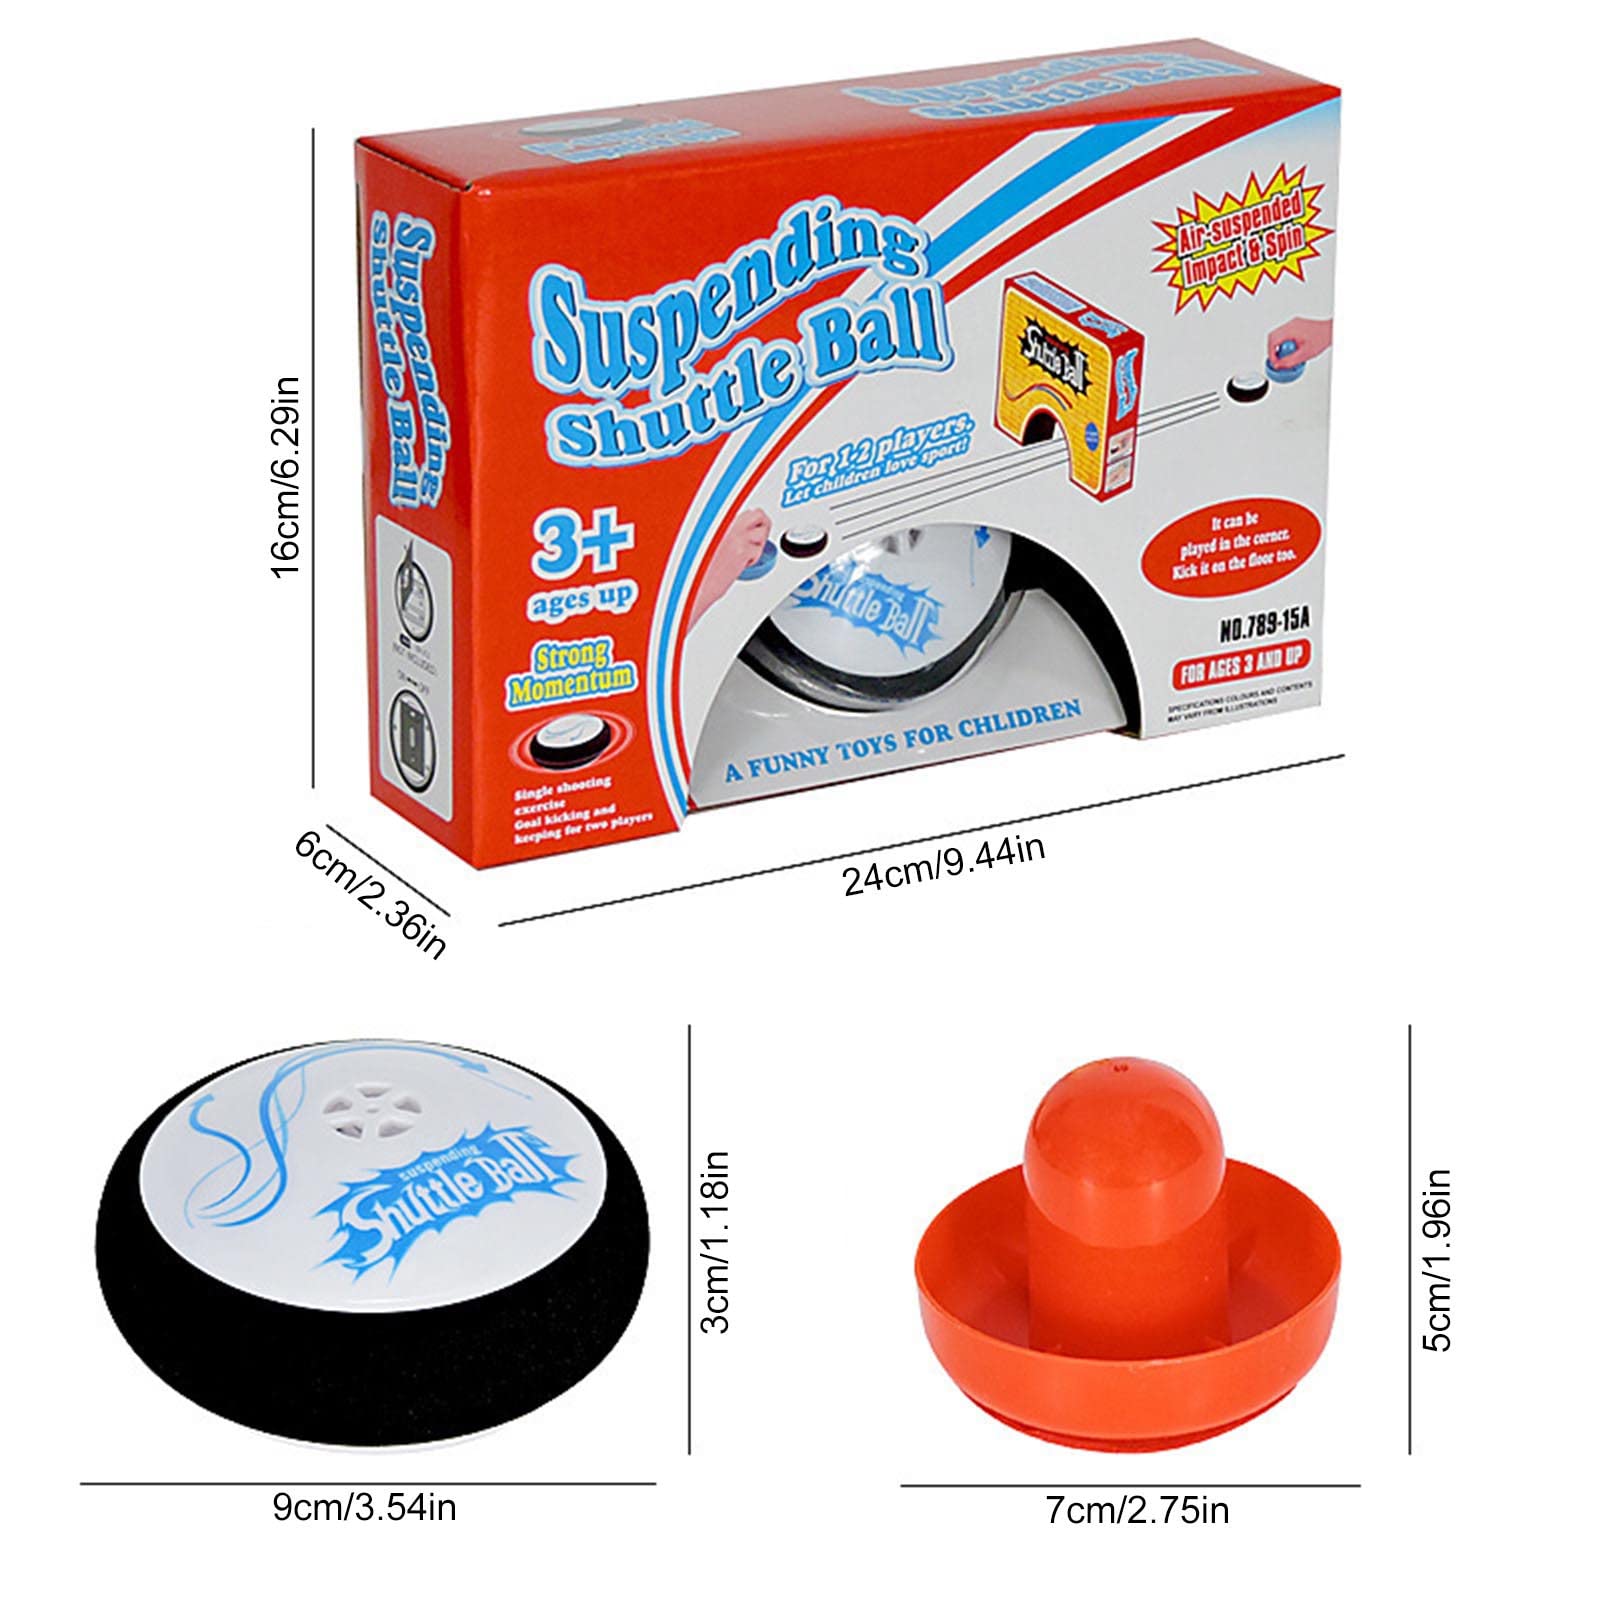 1/2 Set Air Hockey Table Game Air Hockey Toy Set Arcade Game Air Hockey Puck and Paddle with 2 Air Hockey Strikers, Novelty Tabletop Hockey Hover Pack for Kids, Hockey Board Game Toy Gift - Stay Fun